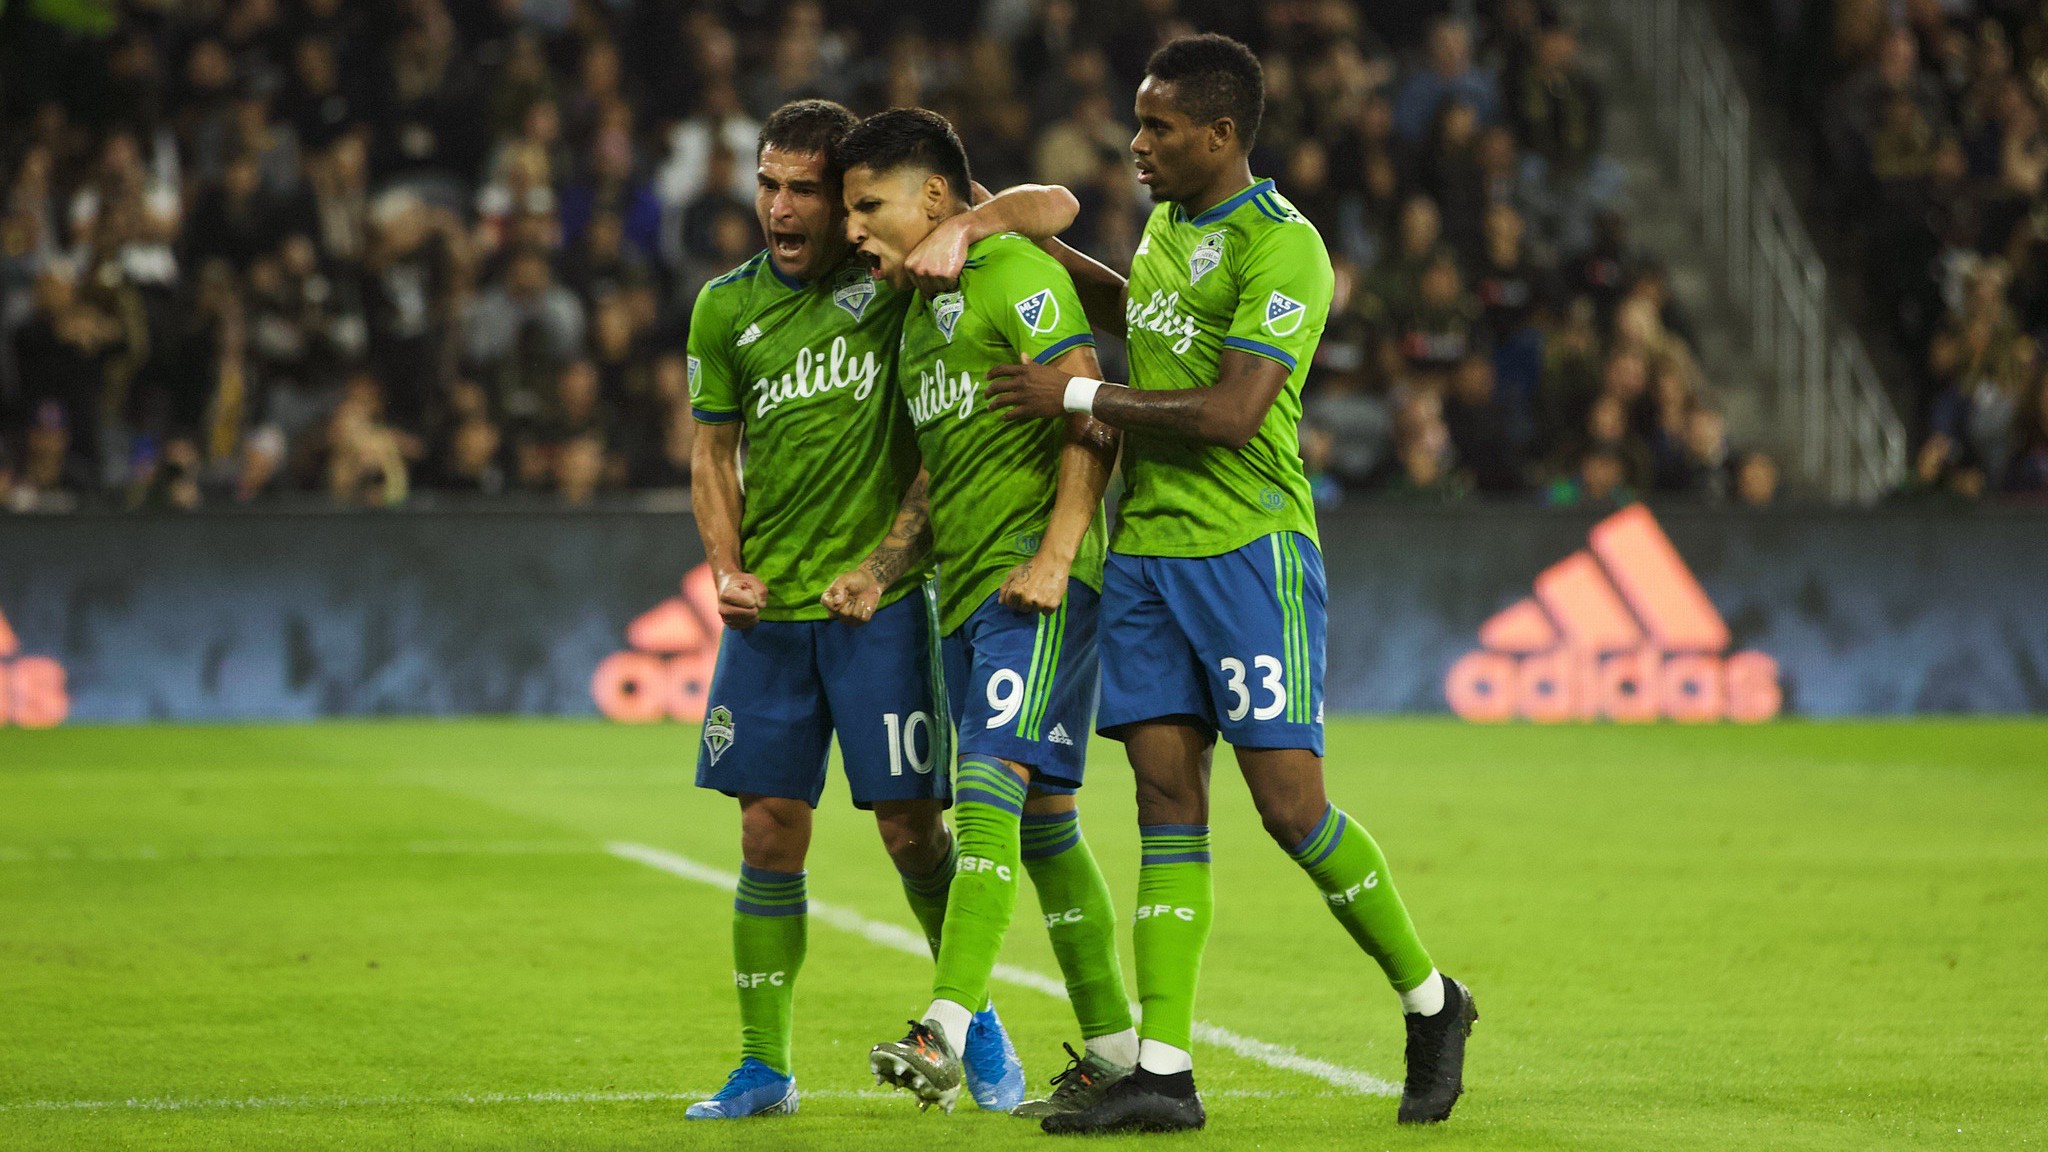 Timeline: How Seattle Sounders FC revealed jersey partnership with Zulily